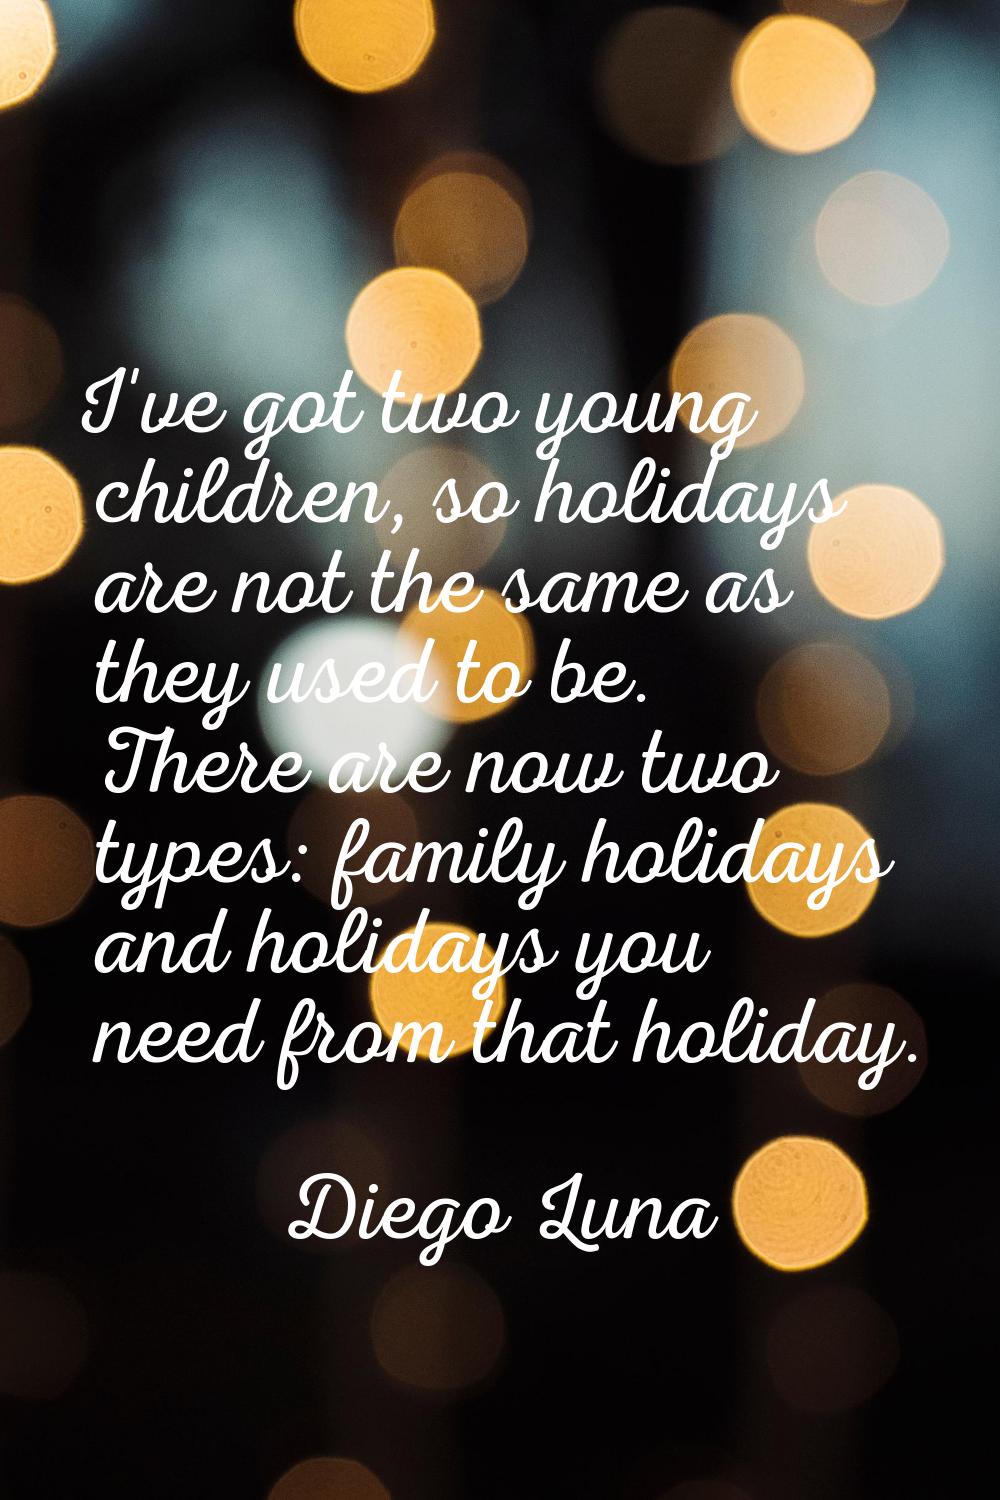 I've got two young children, so holidays are not the same as they used to be. There are now two typ